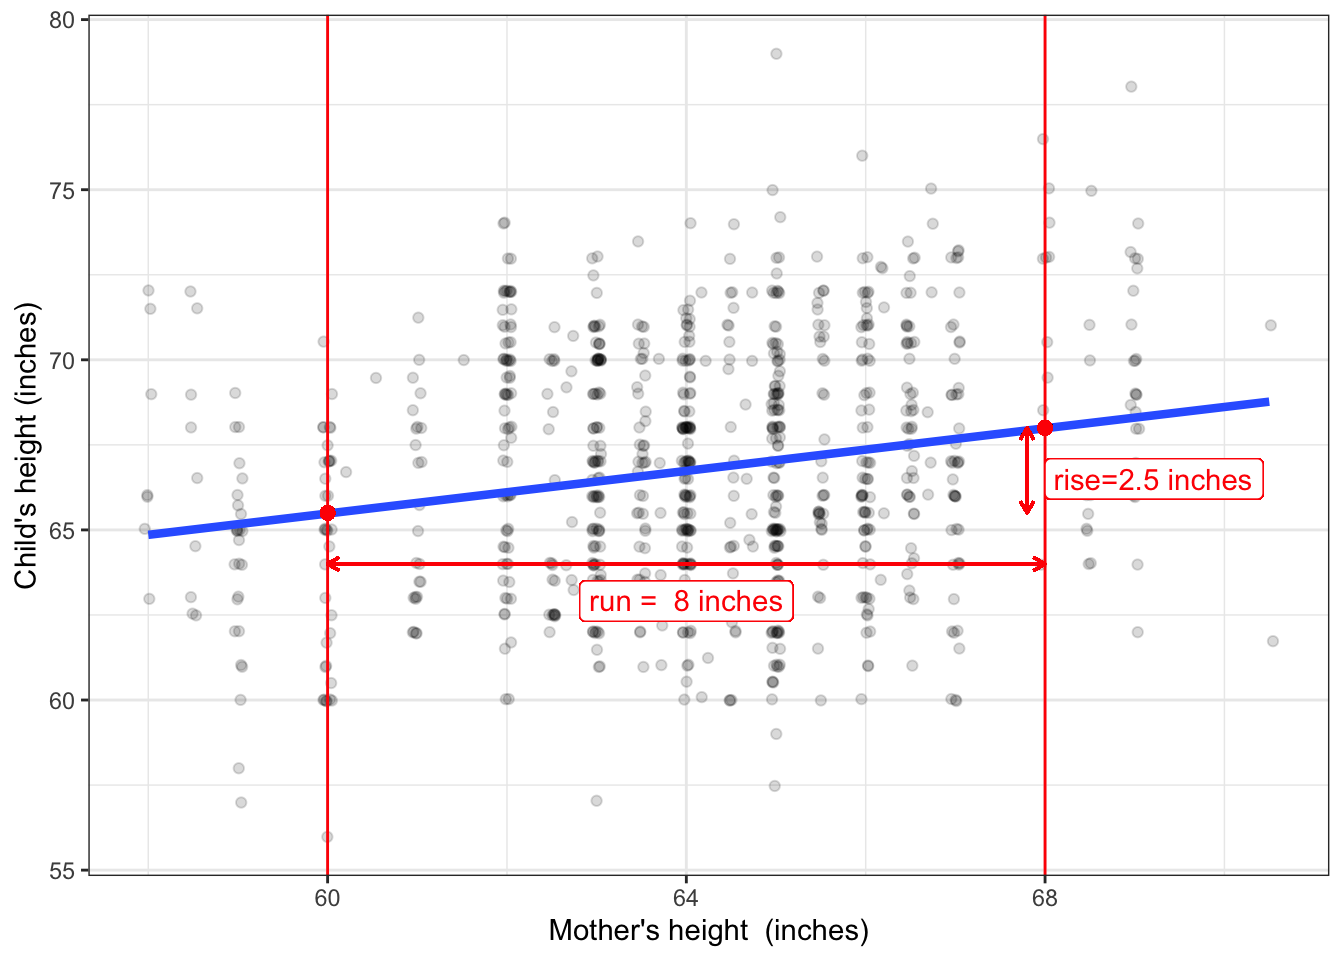 Figure 7.2: A reproduction of Figure 6.1(b) with annotations to show the effect size.